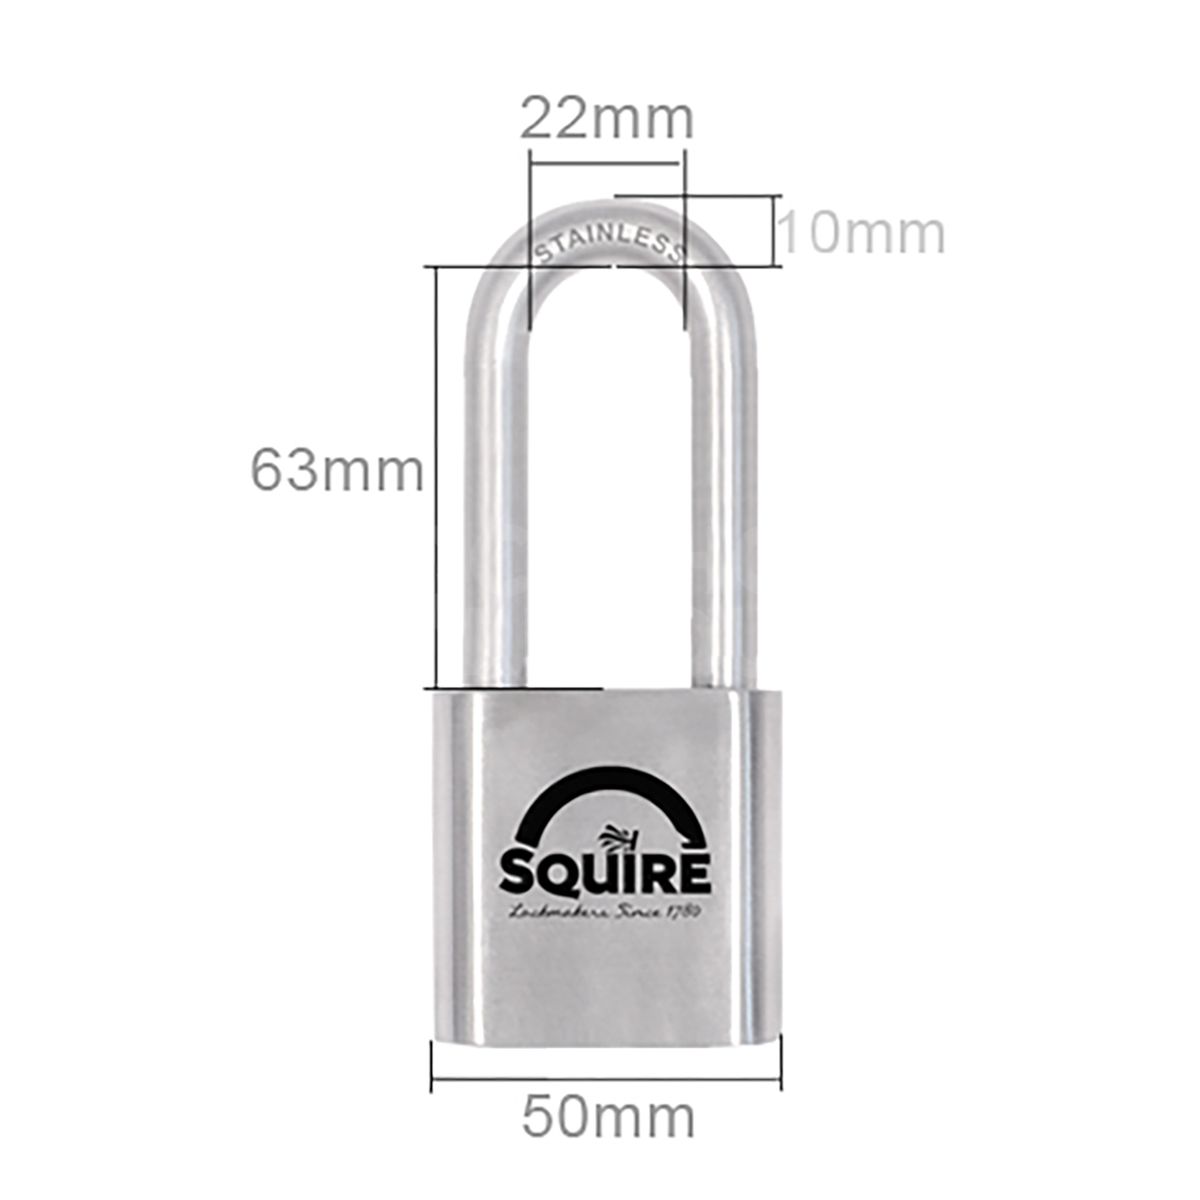 Dimensions Image: SQUIRE Stronghold® ST50S - 2.5 Long Shackle Stainless Steel Padlock